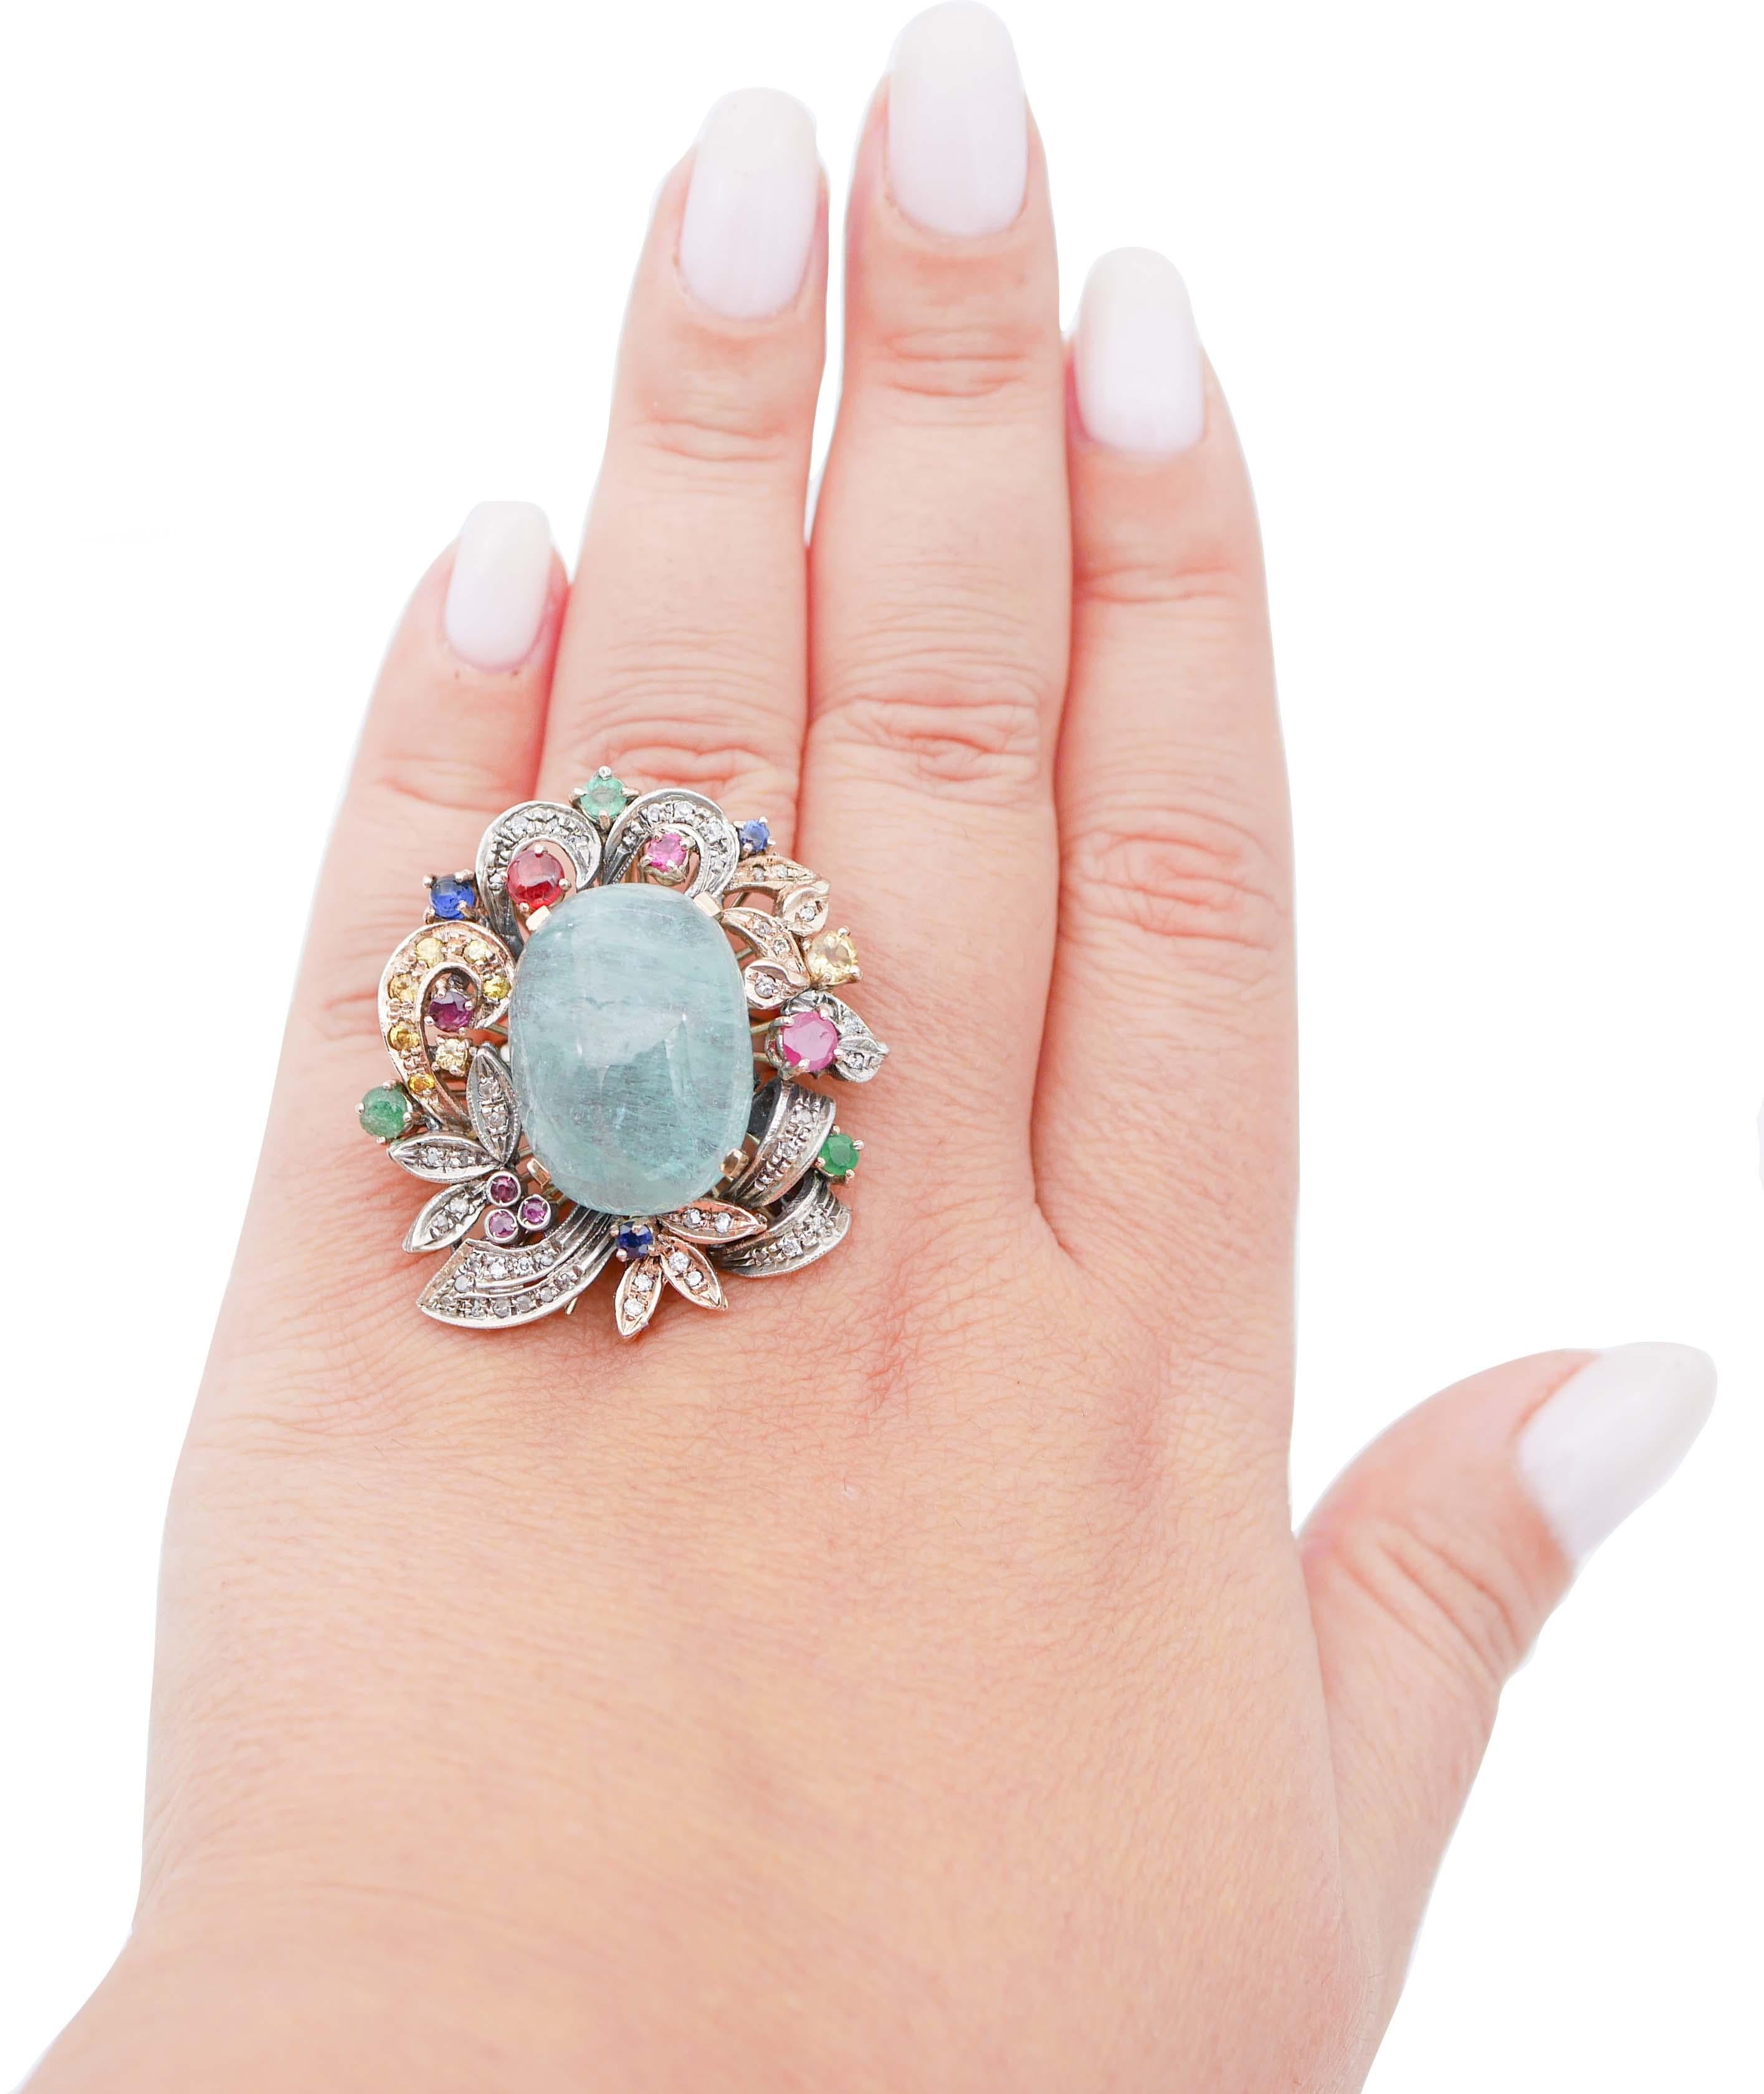 Mixed Cut Aquamarine, Emeralds, Rubies, Sapphires, Diamonds, Rose Gold and Silver Ring.